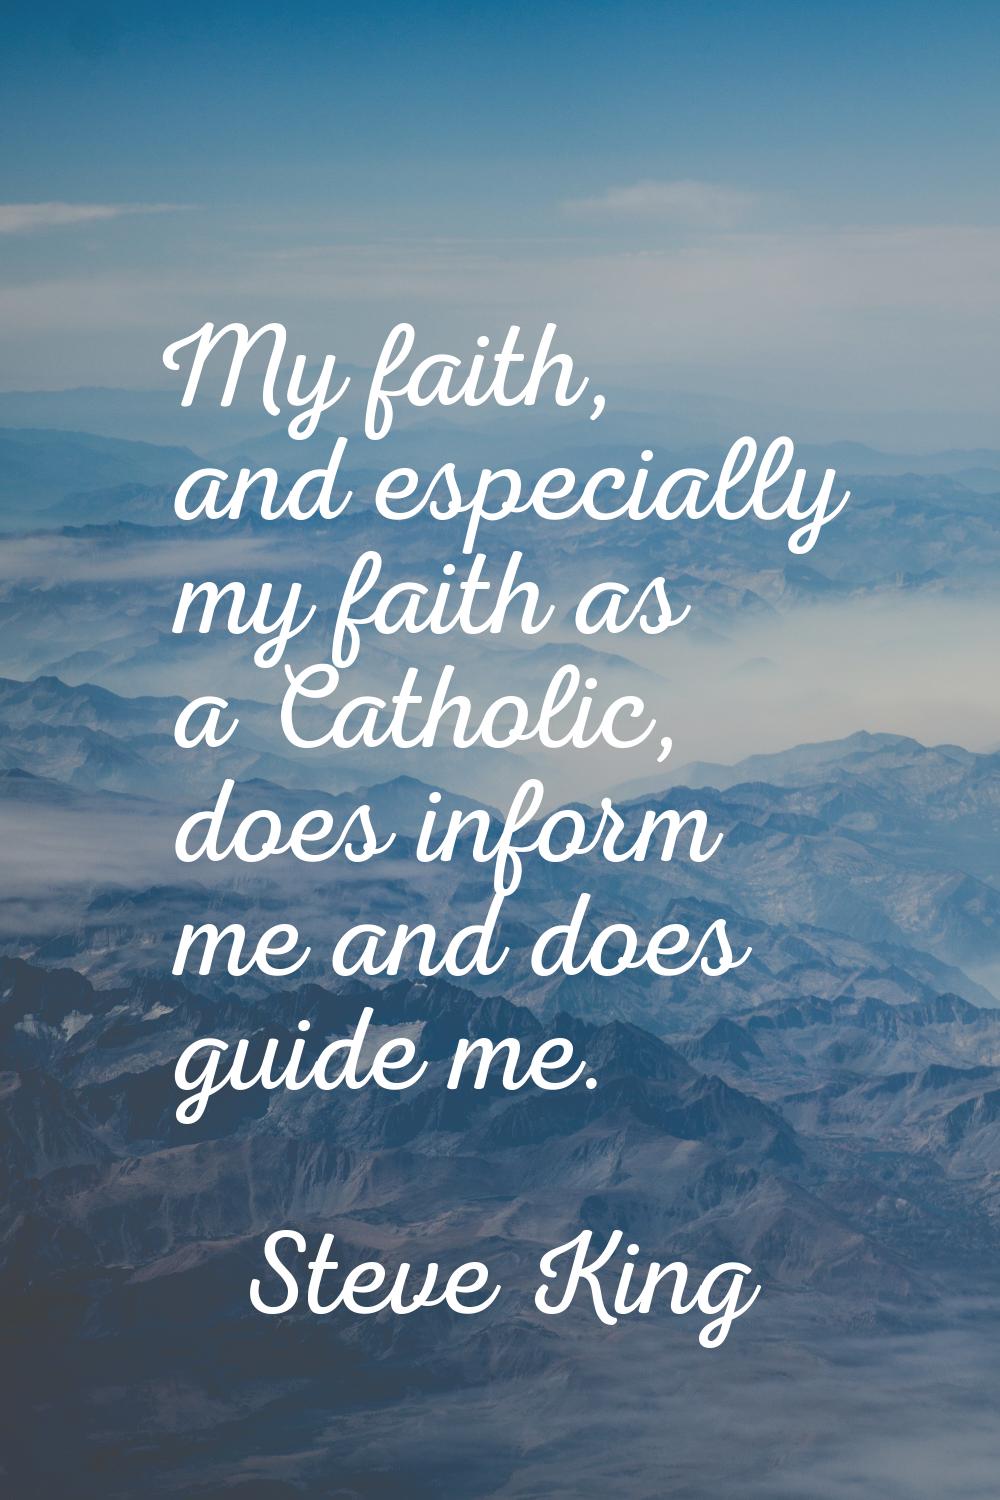 My faith, and especially my faith as a Catholic, does inform me and does guide me.